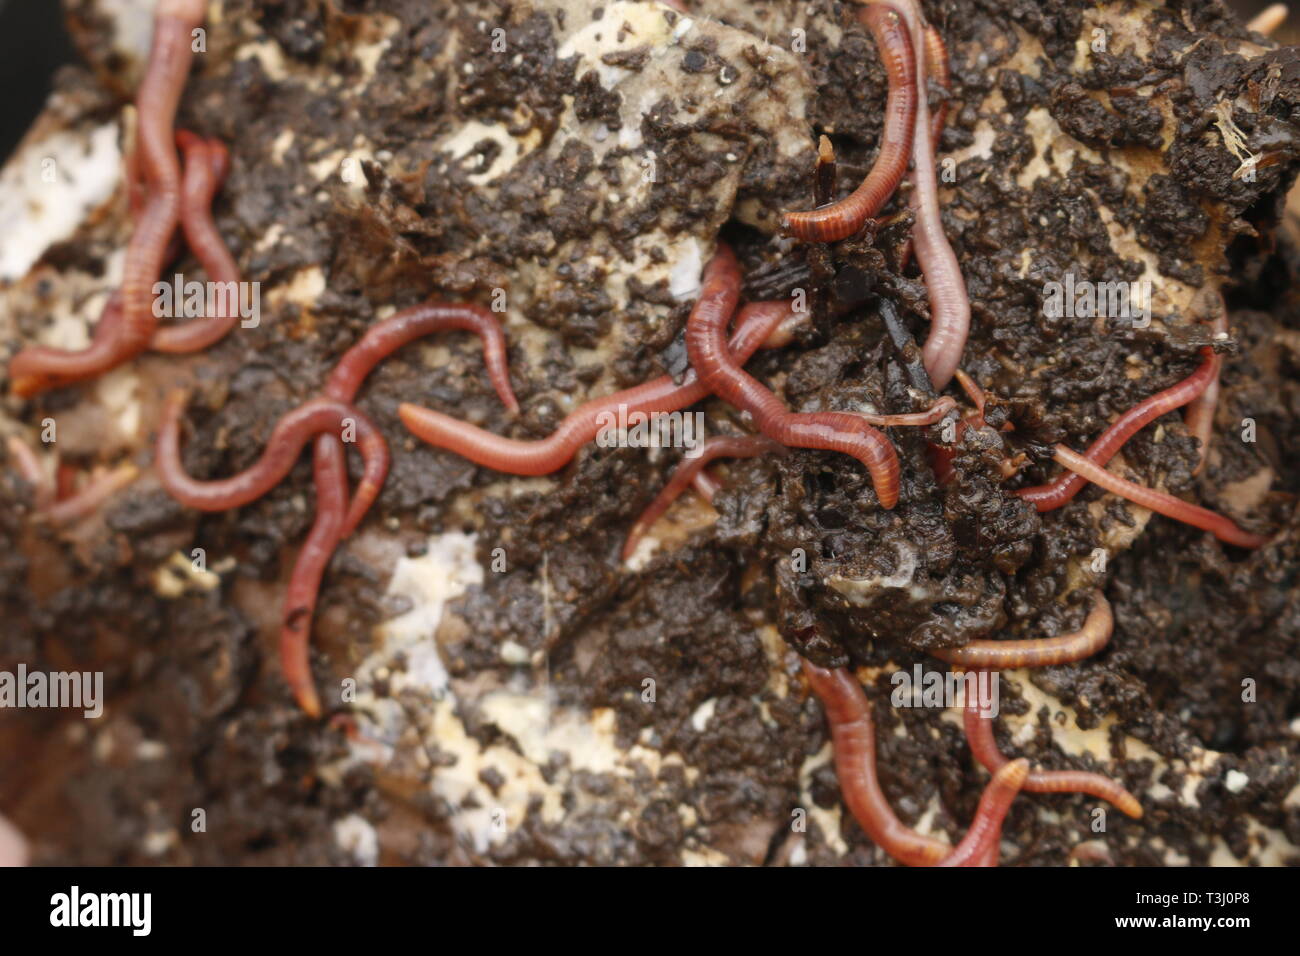 Red worms in compost or manure. Live bait for fishing Stock Photo - Alamy